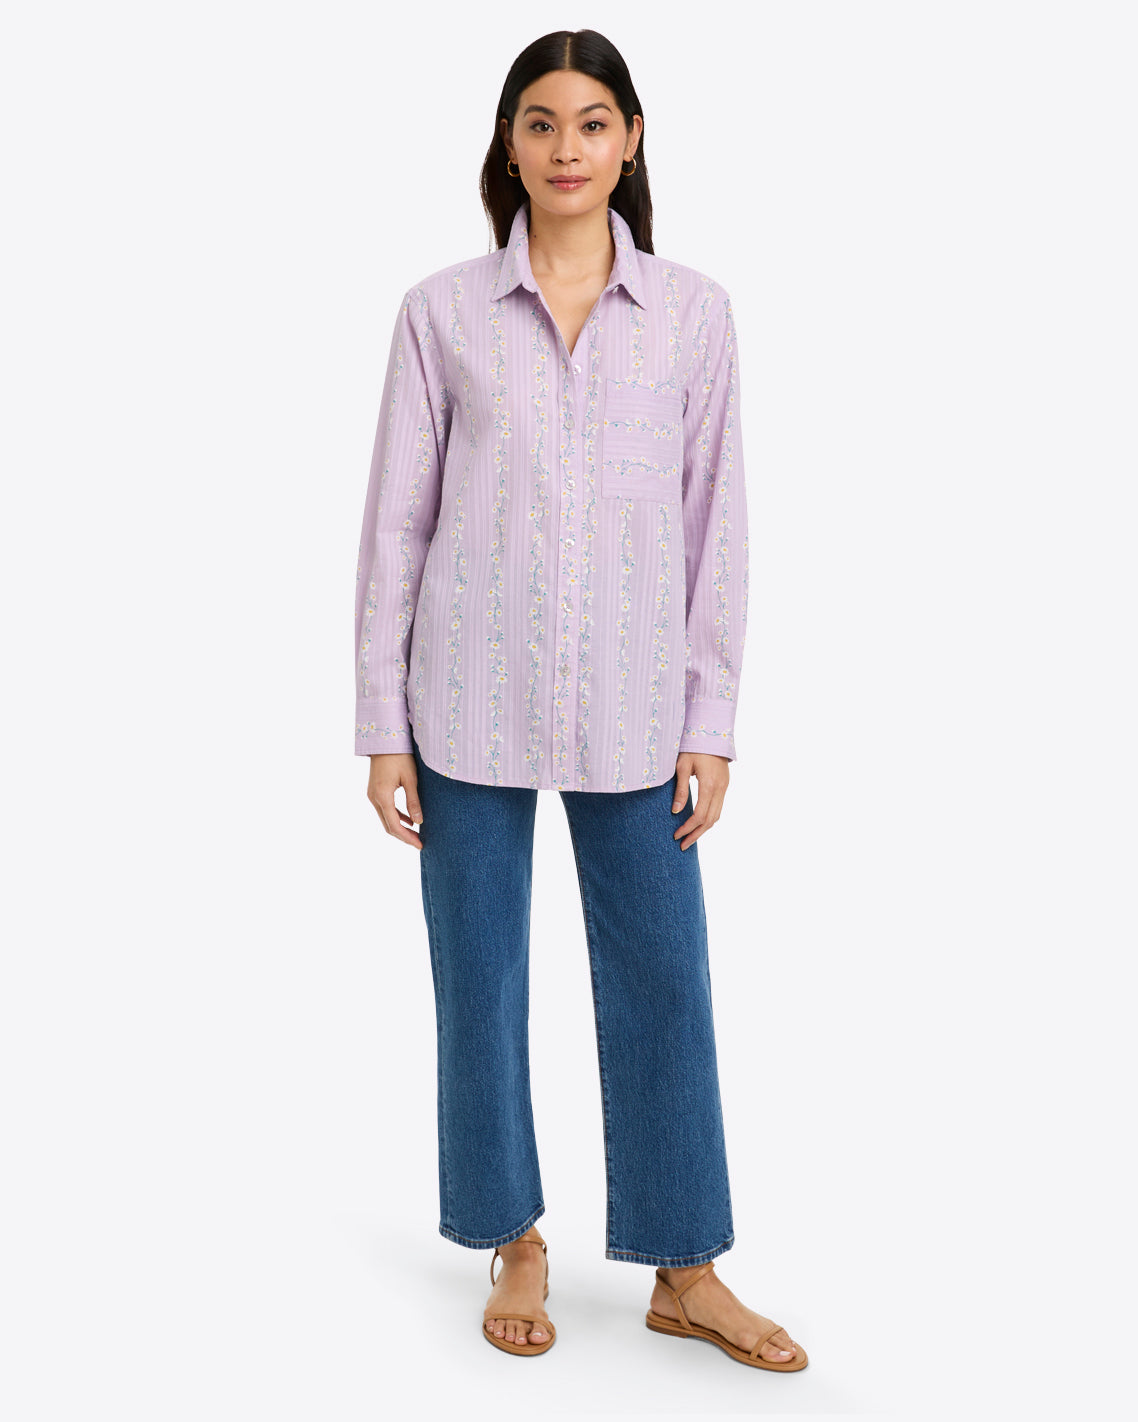 Lynn Long Sleeve Top in Embroidered Cotton Dobby